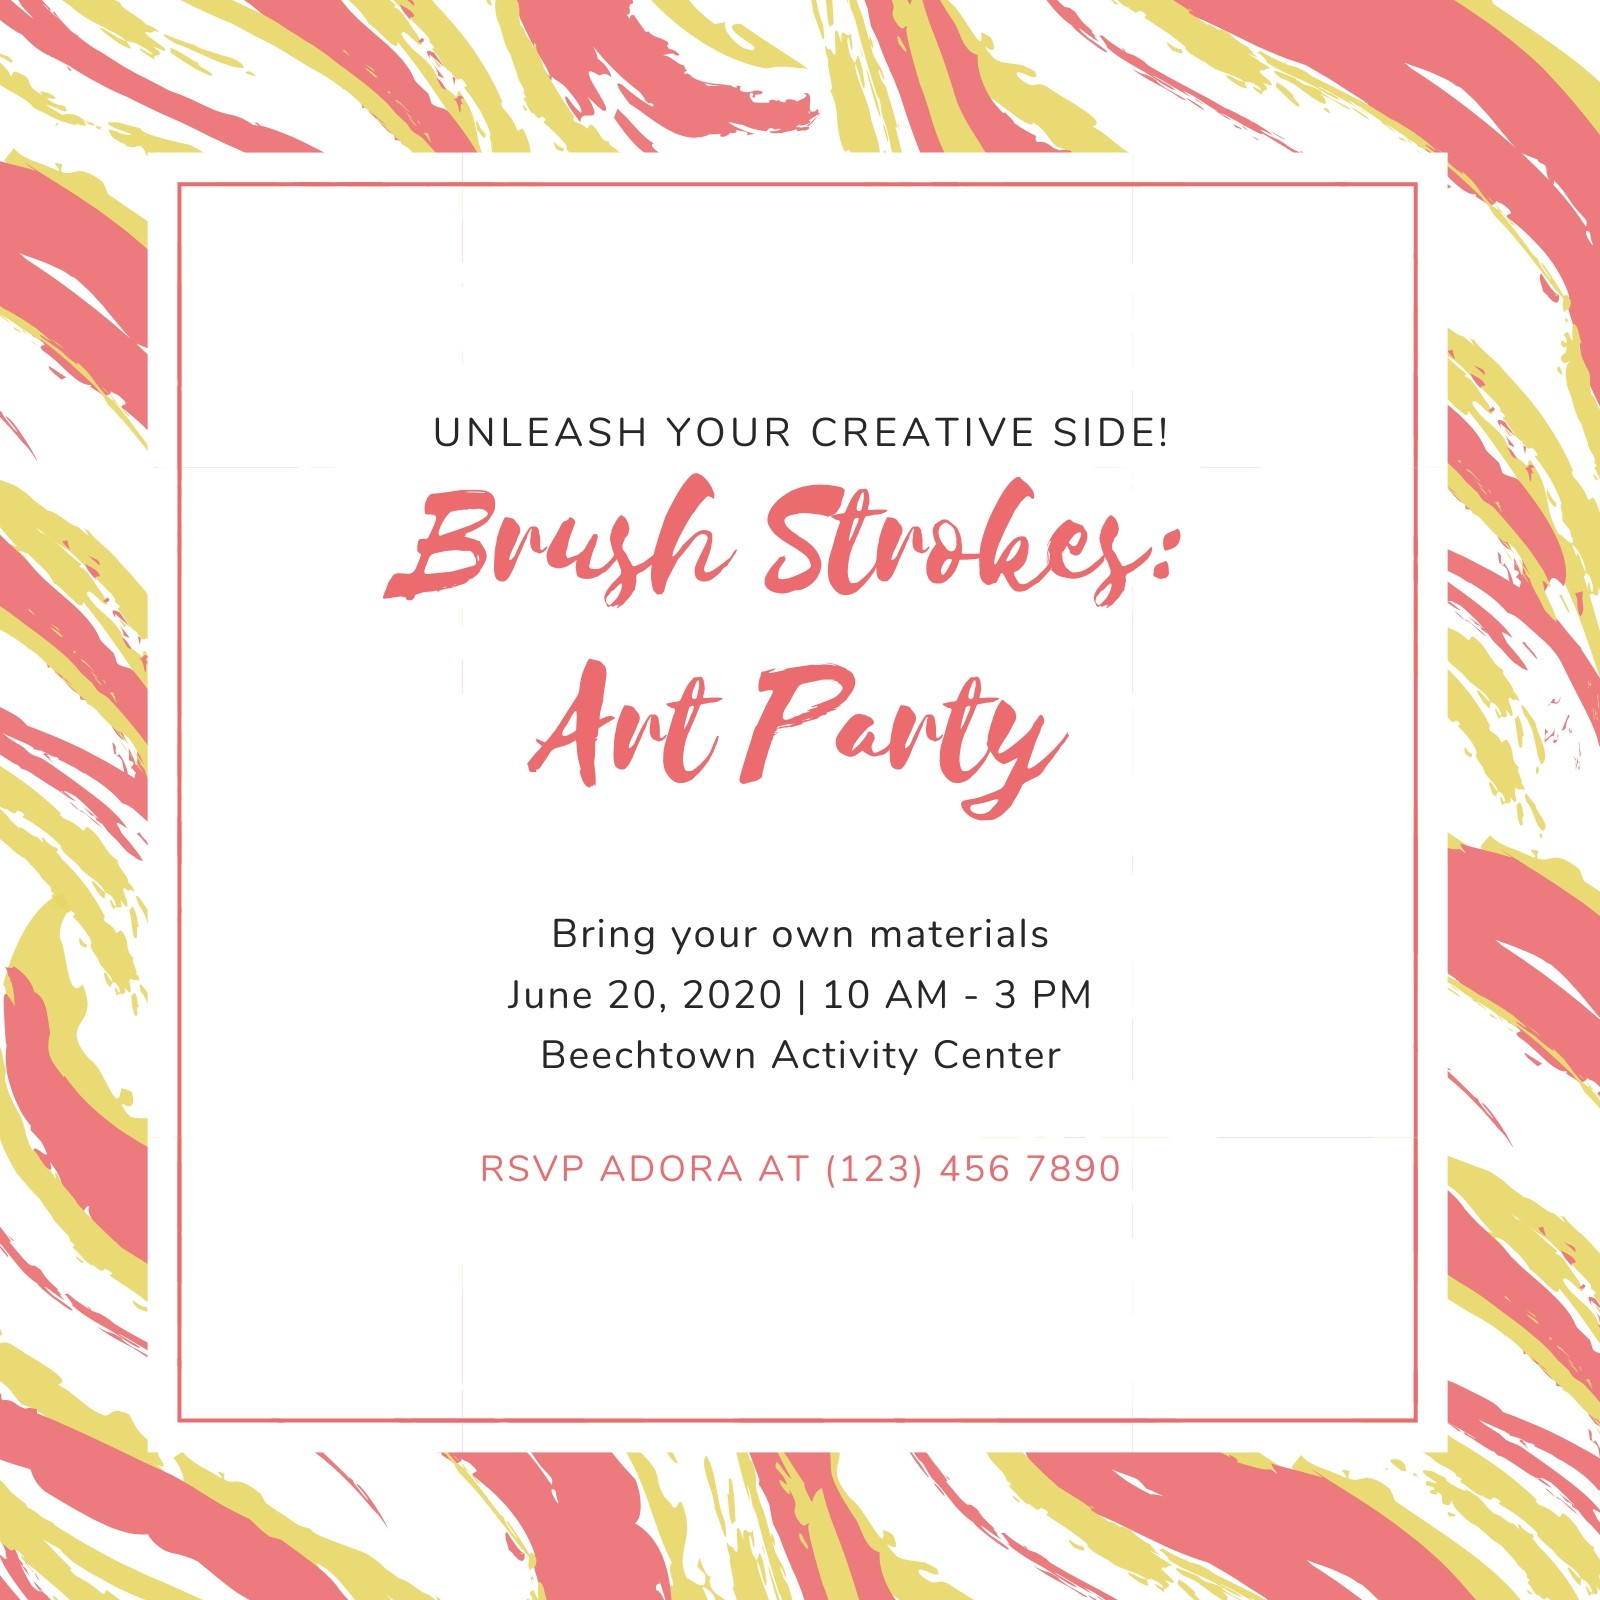 Art Party Art Party Signs Art Party Favors Art Party -   Art party  invitations, Art birthday party, Art birthday invitations